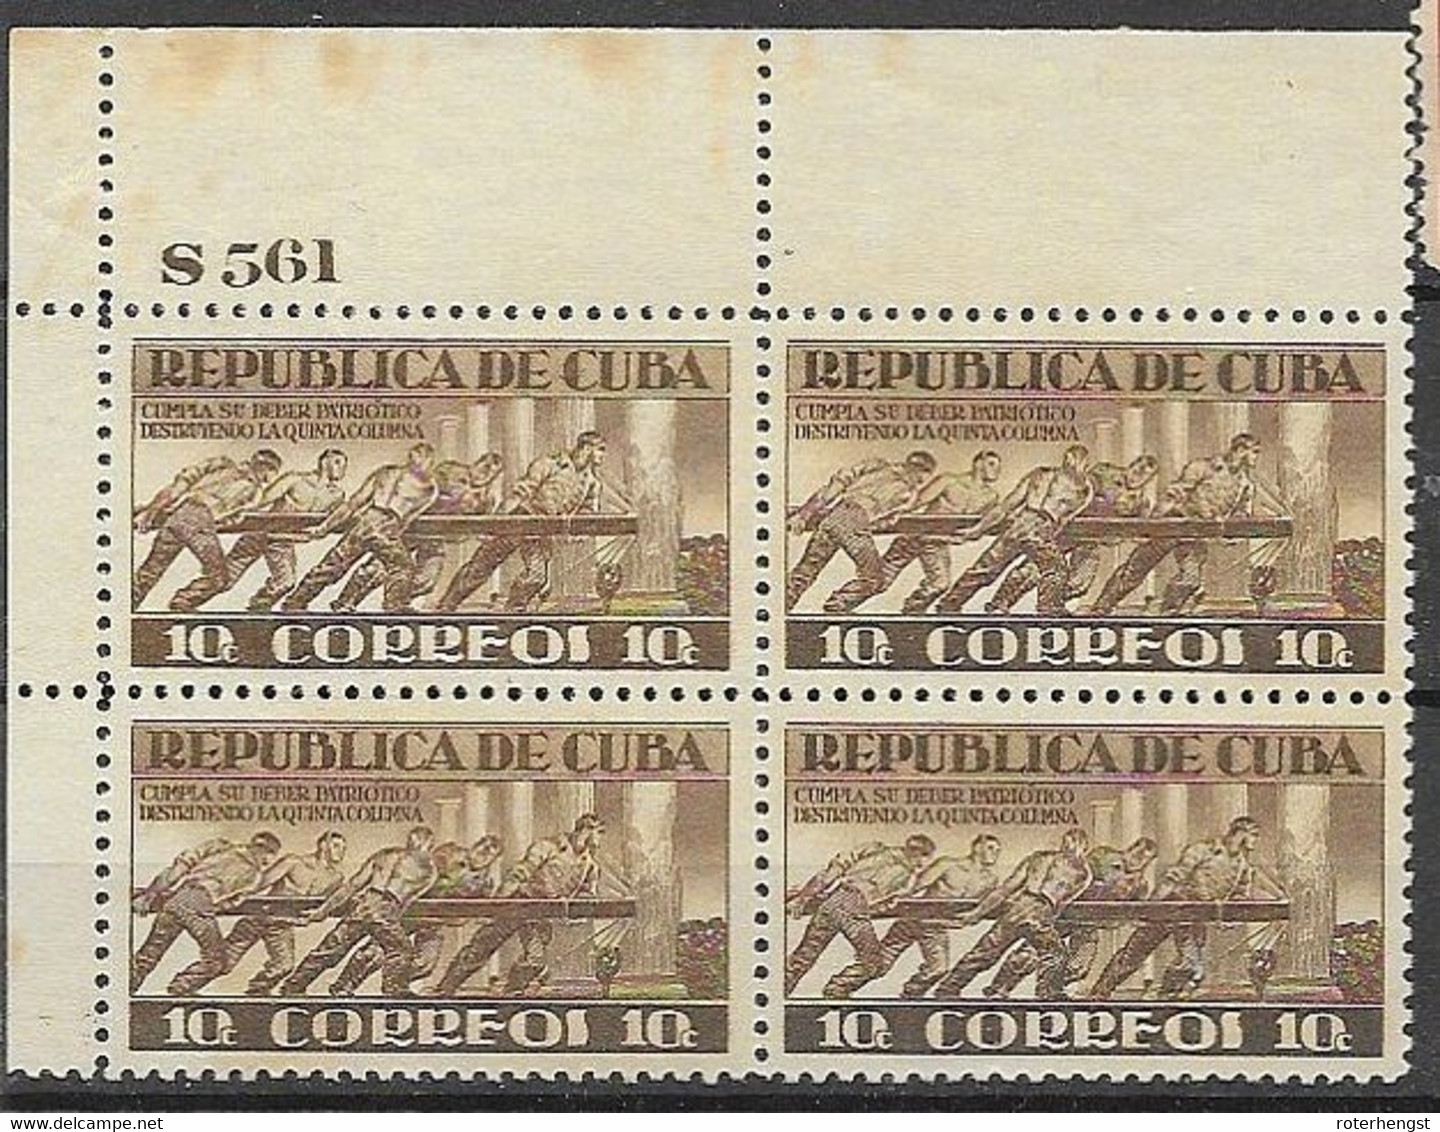 Cuba Mnh ** With Plate Number (stain Only On Border, Stamps Fine) 1943 About 30 Euros - Nuevos